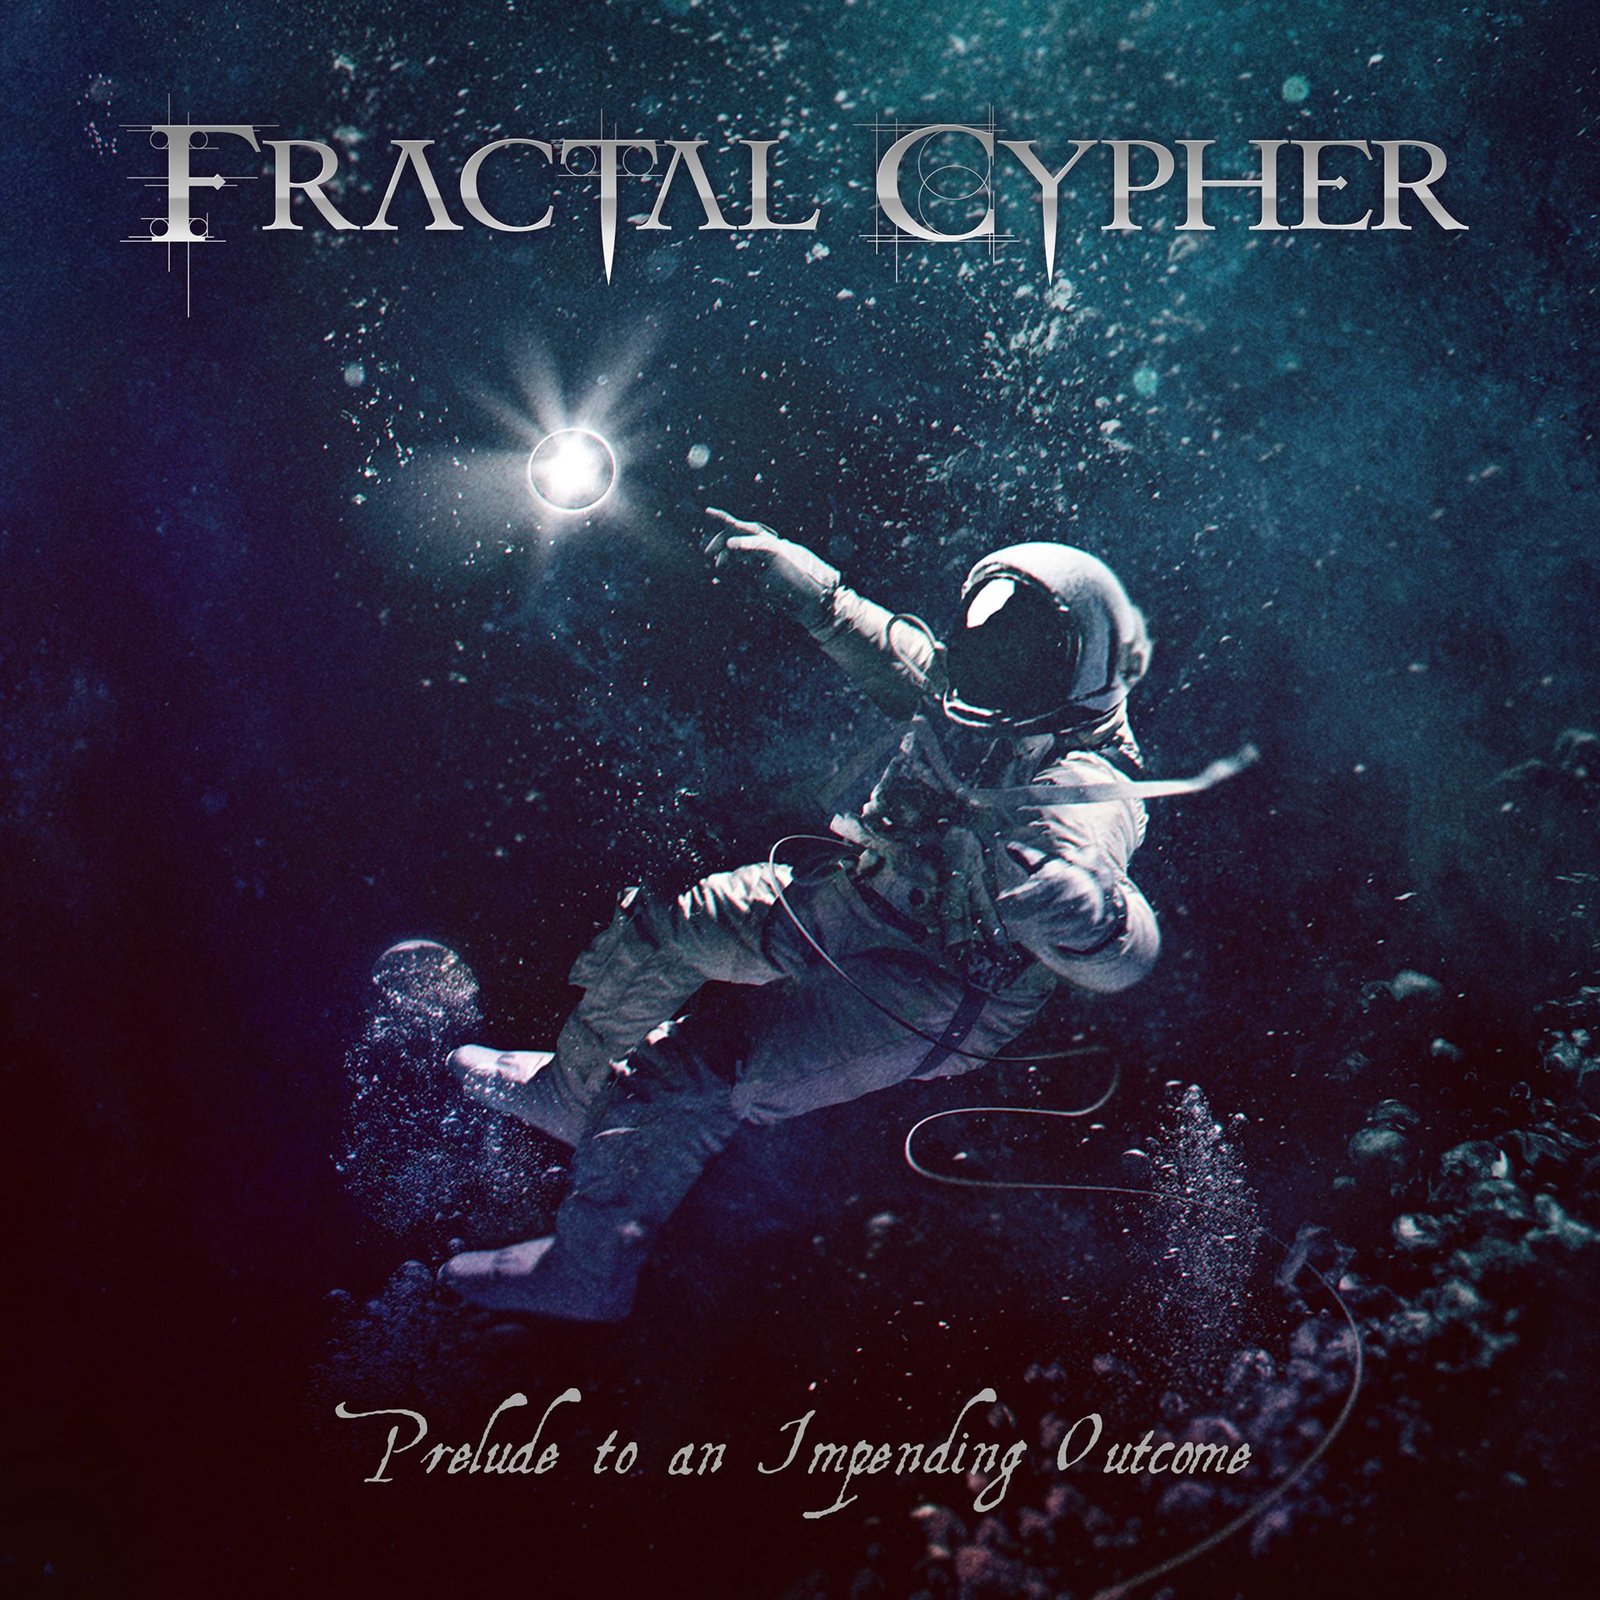 Fractal Cypher – “Prelude To An Impending Outcome”